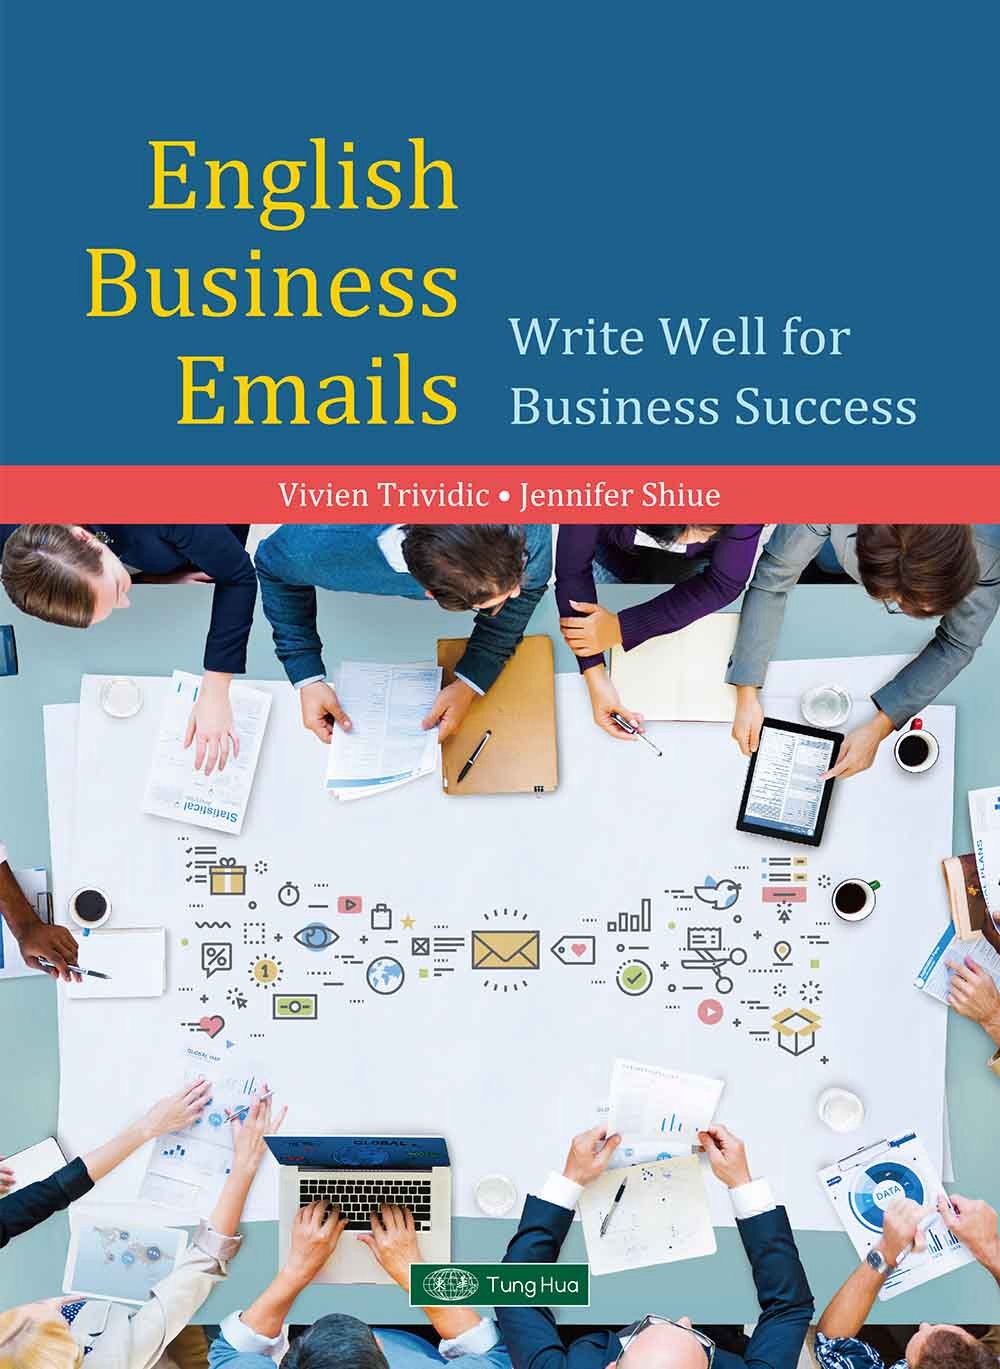 English Business Emails: Write Well for Business Success